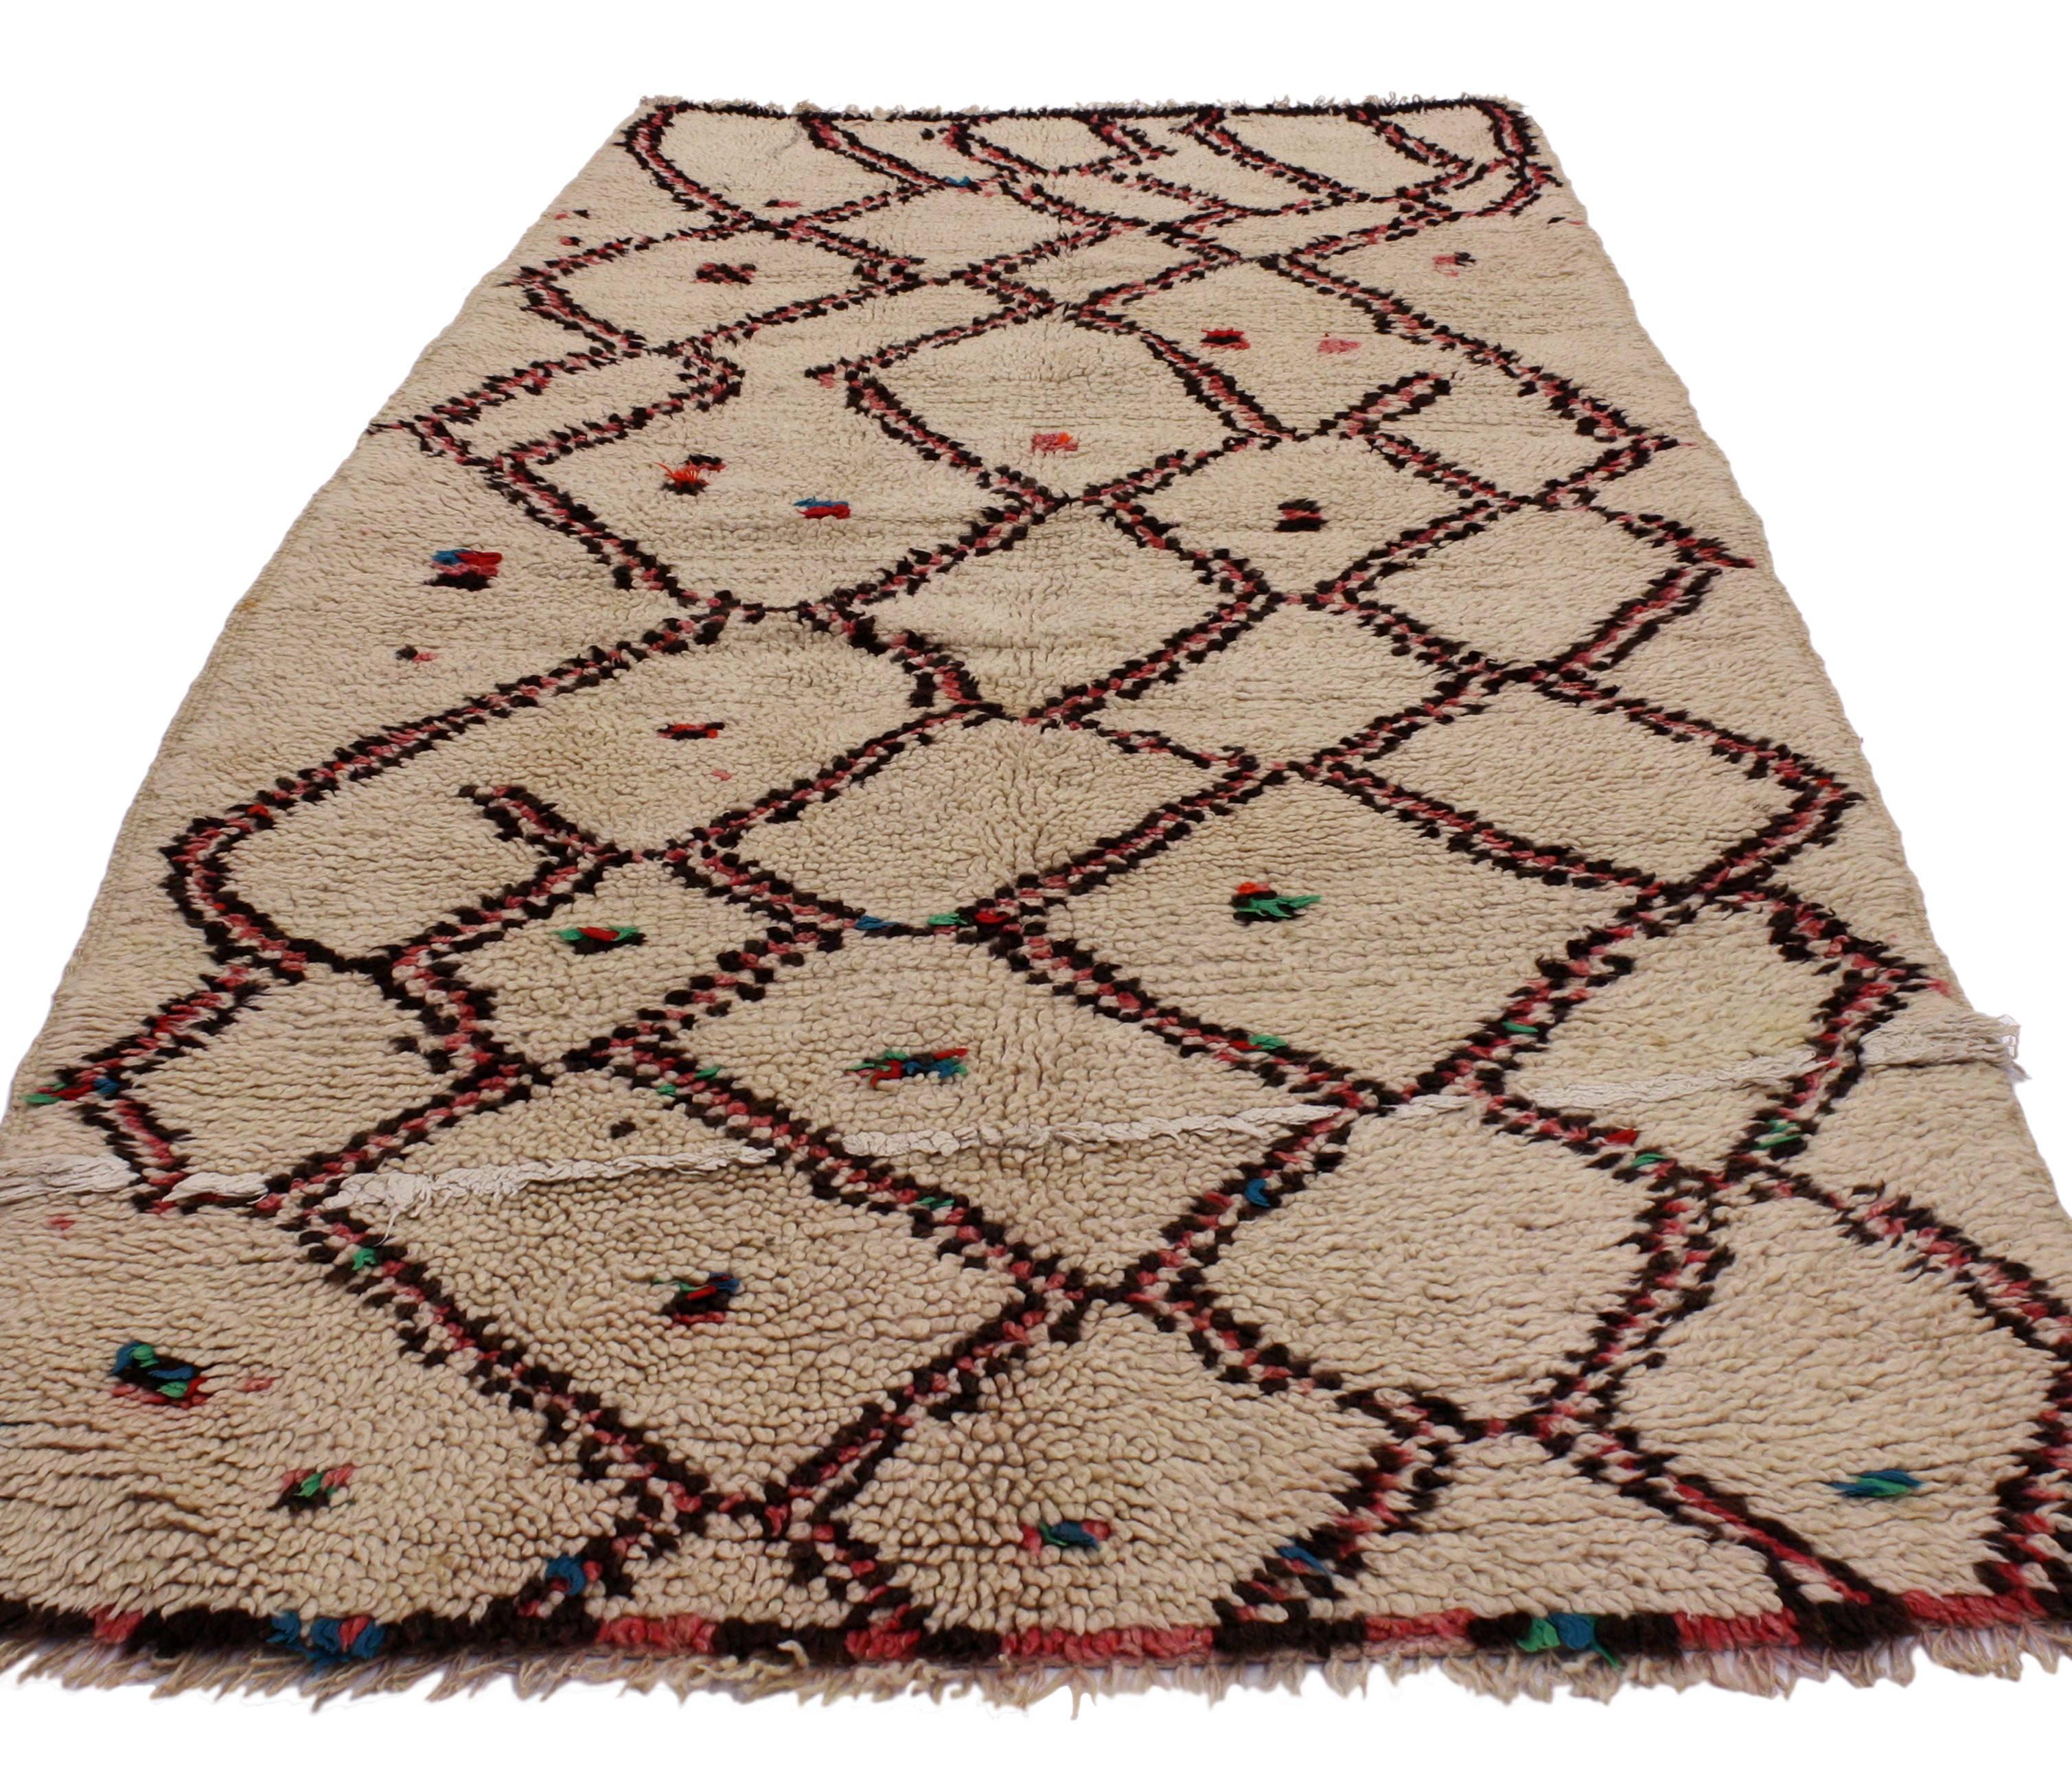 Vintage Berber Moroccan Azilal Rug, Ait Bou Ichaouen Talsint Carpet In Good Condition For Sale In Dallas, TX